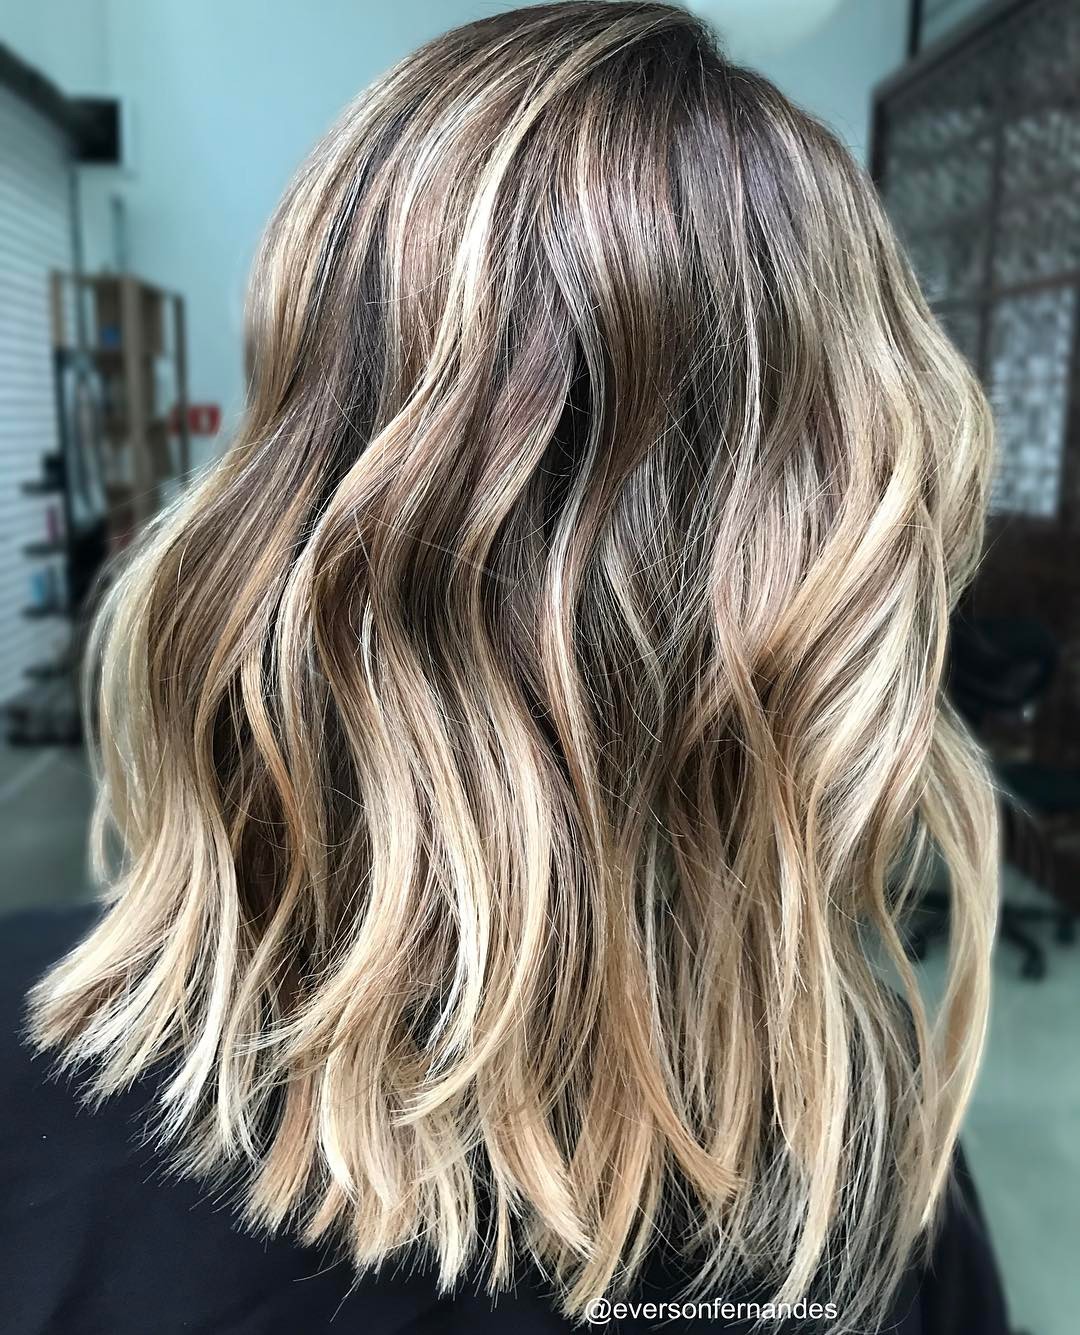 Light Brown Hair With Sun-Kissed Highlights